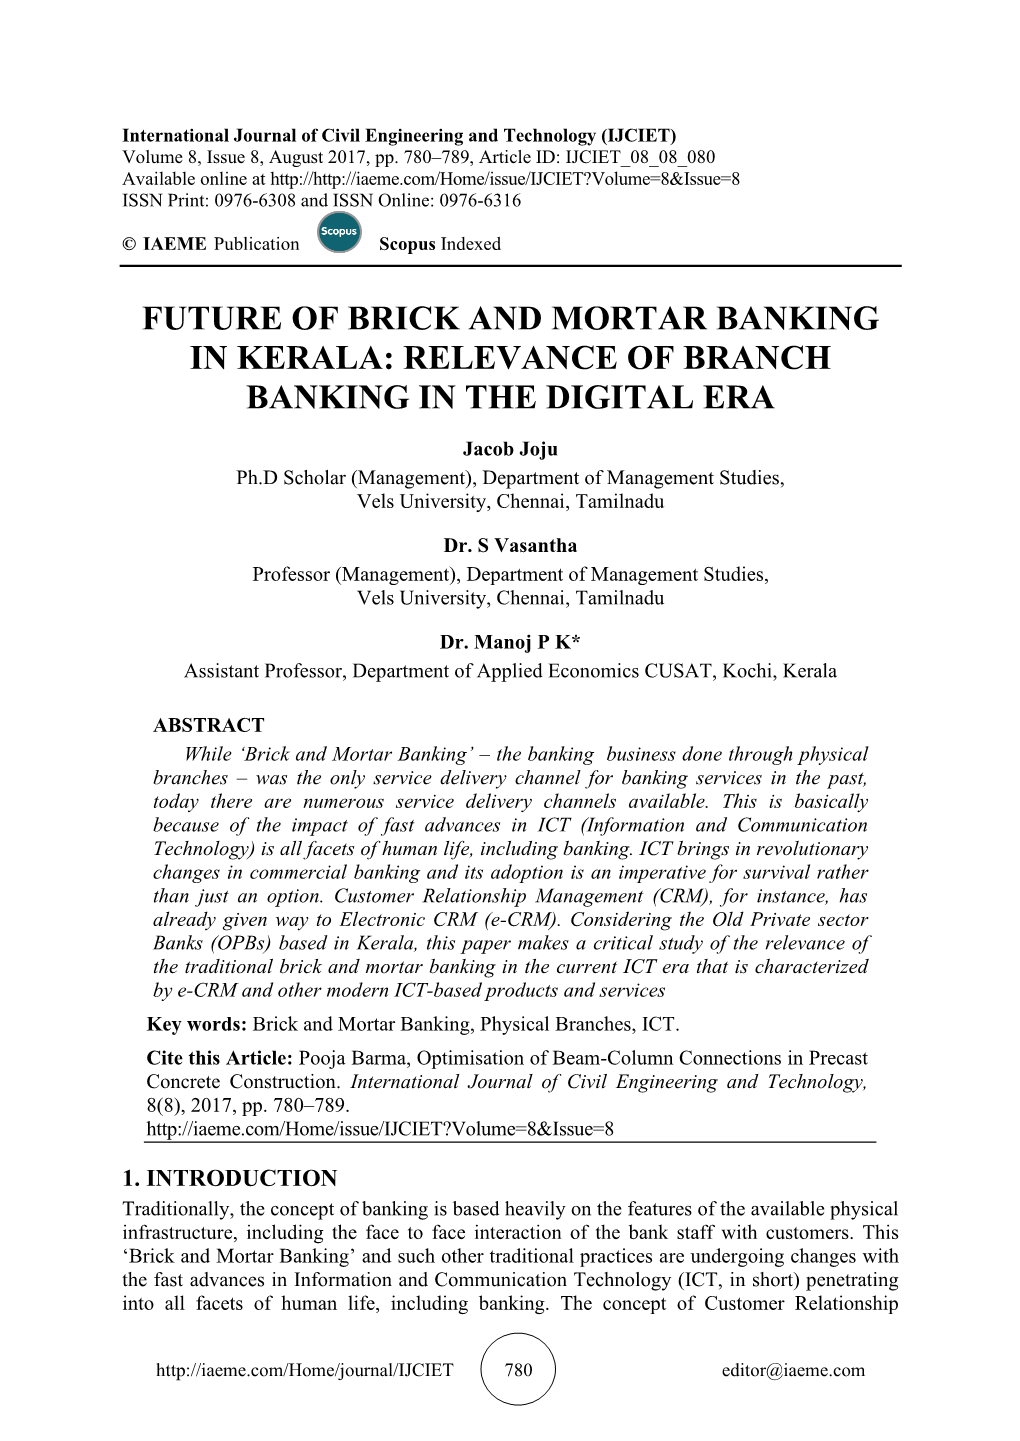 Future of Brick and Mortar Banking in Kerala: Relevance of Branch Banking in the Digital Era